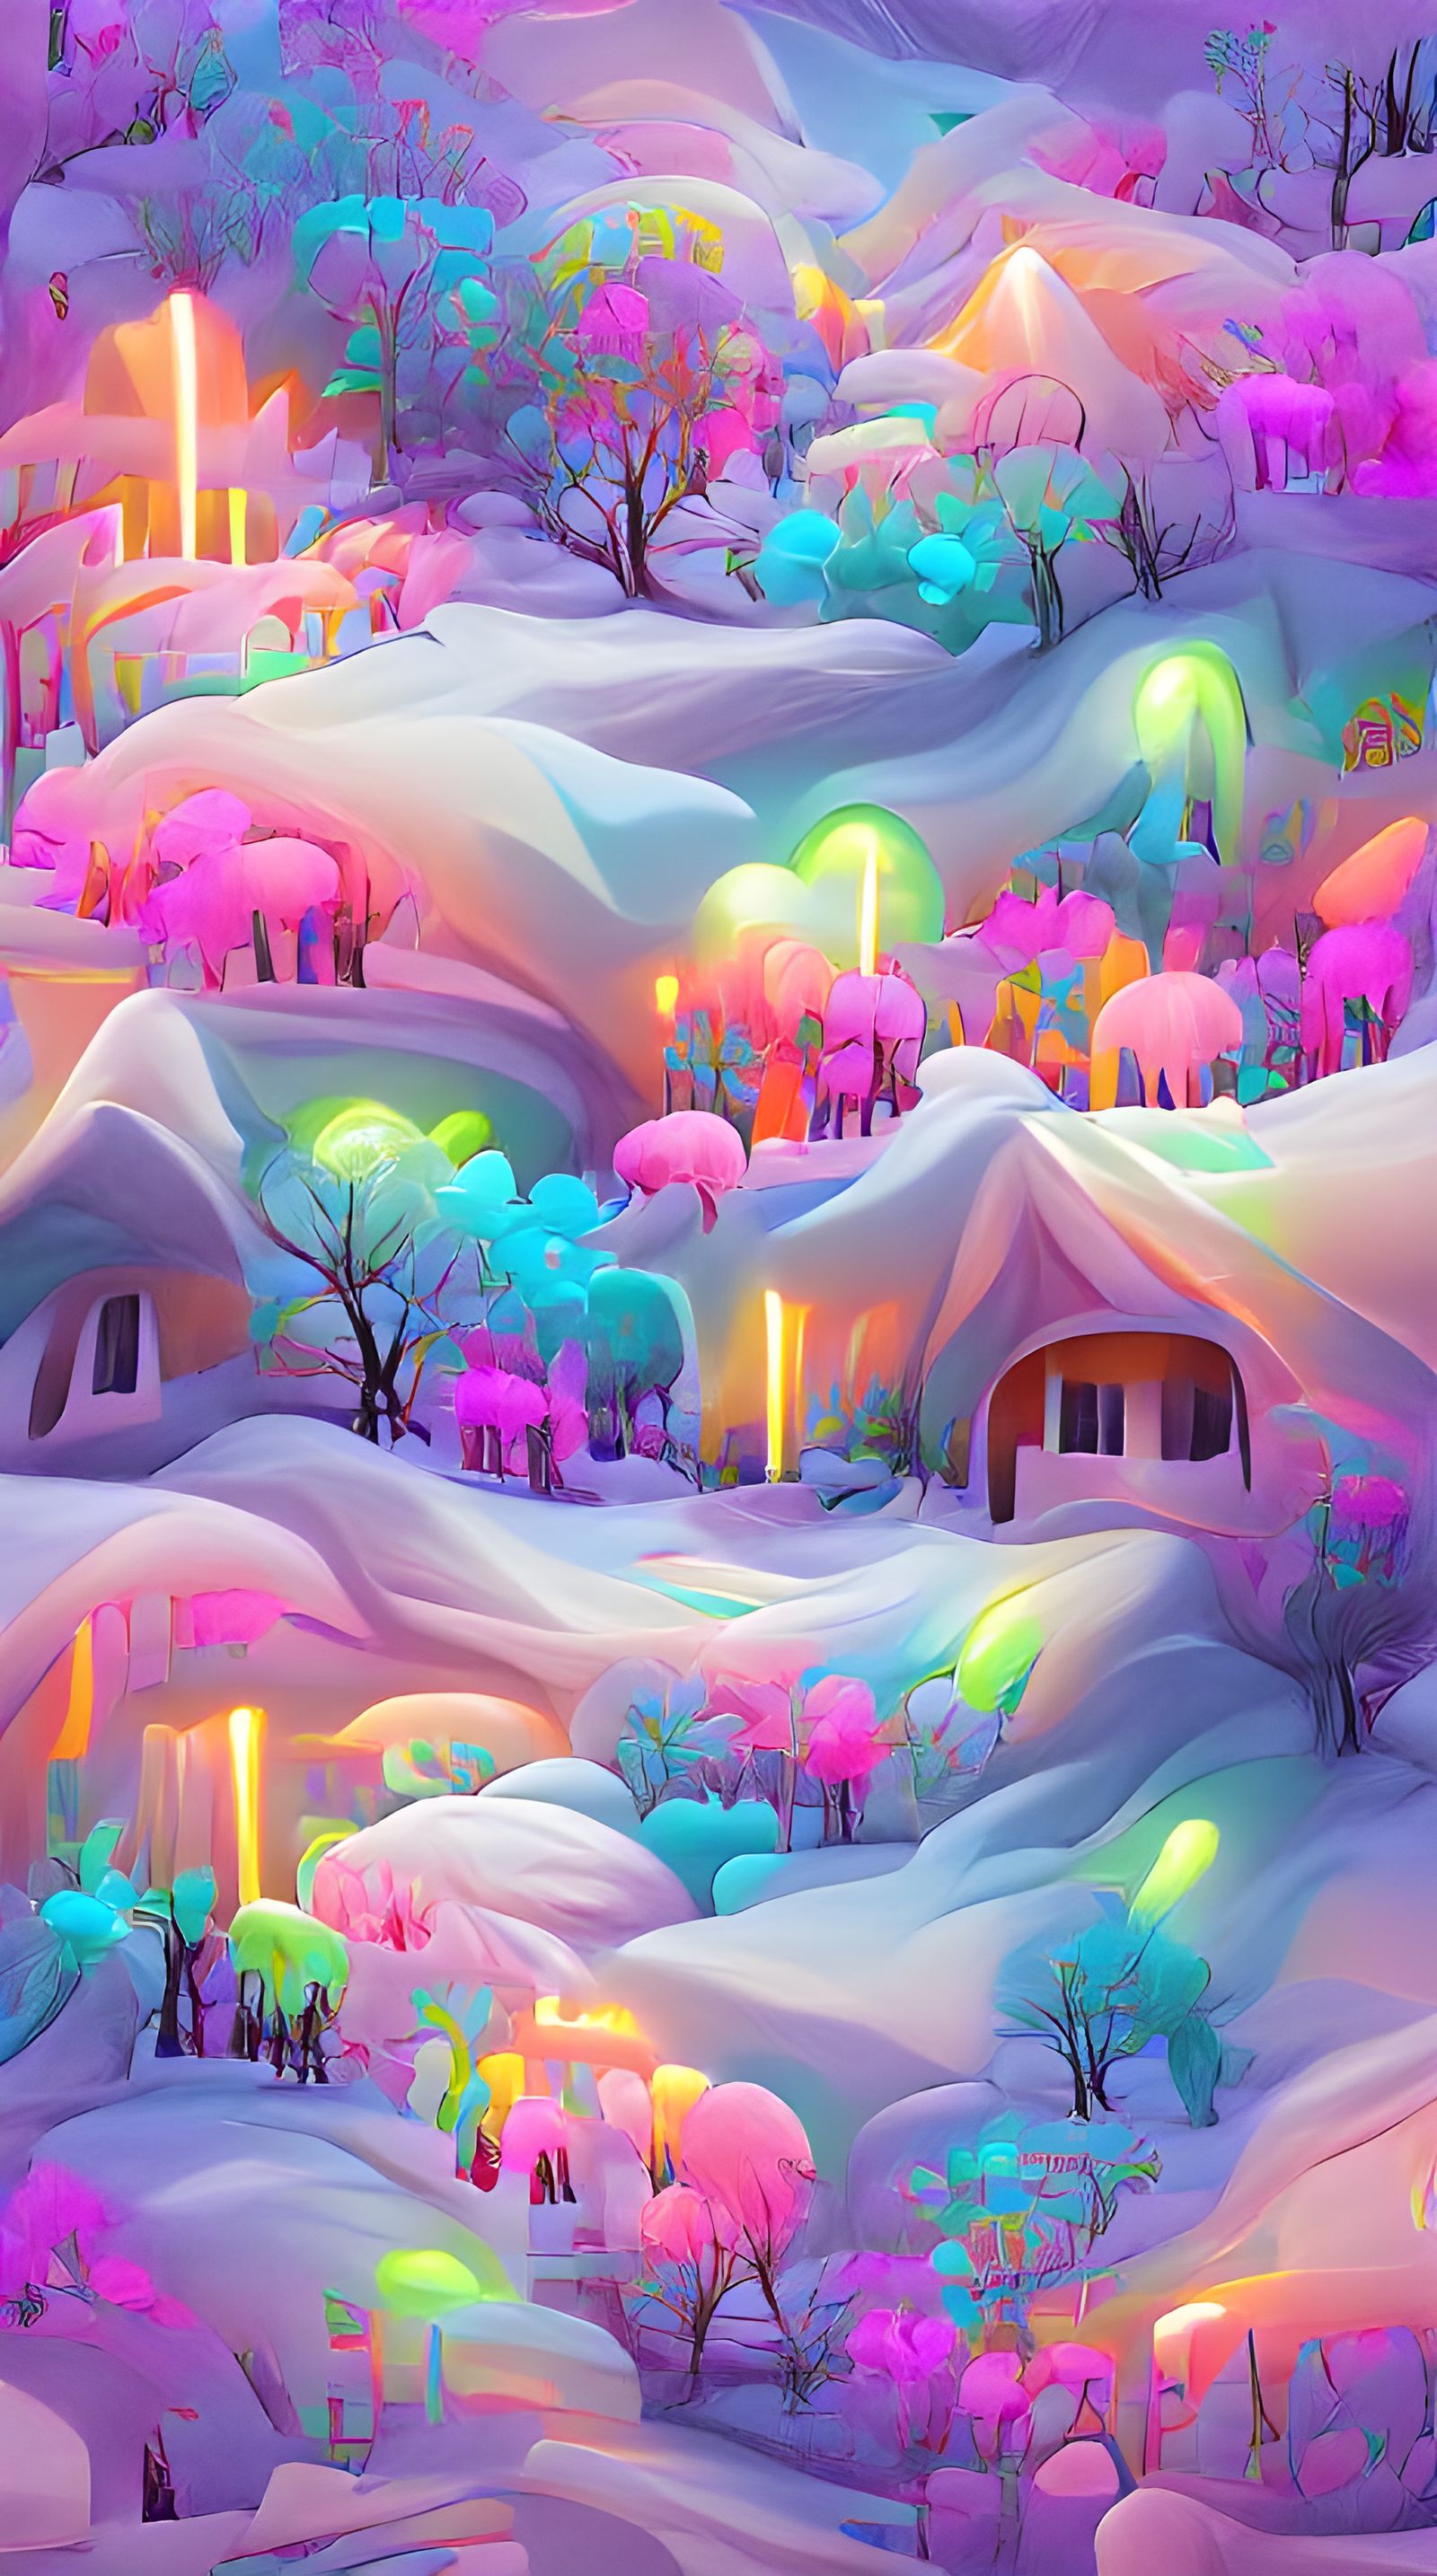 Homes in the snowy mountain 